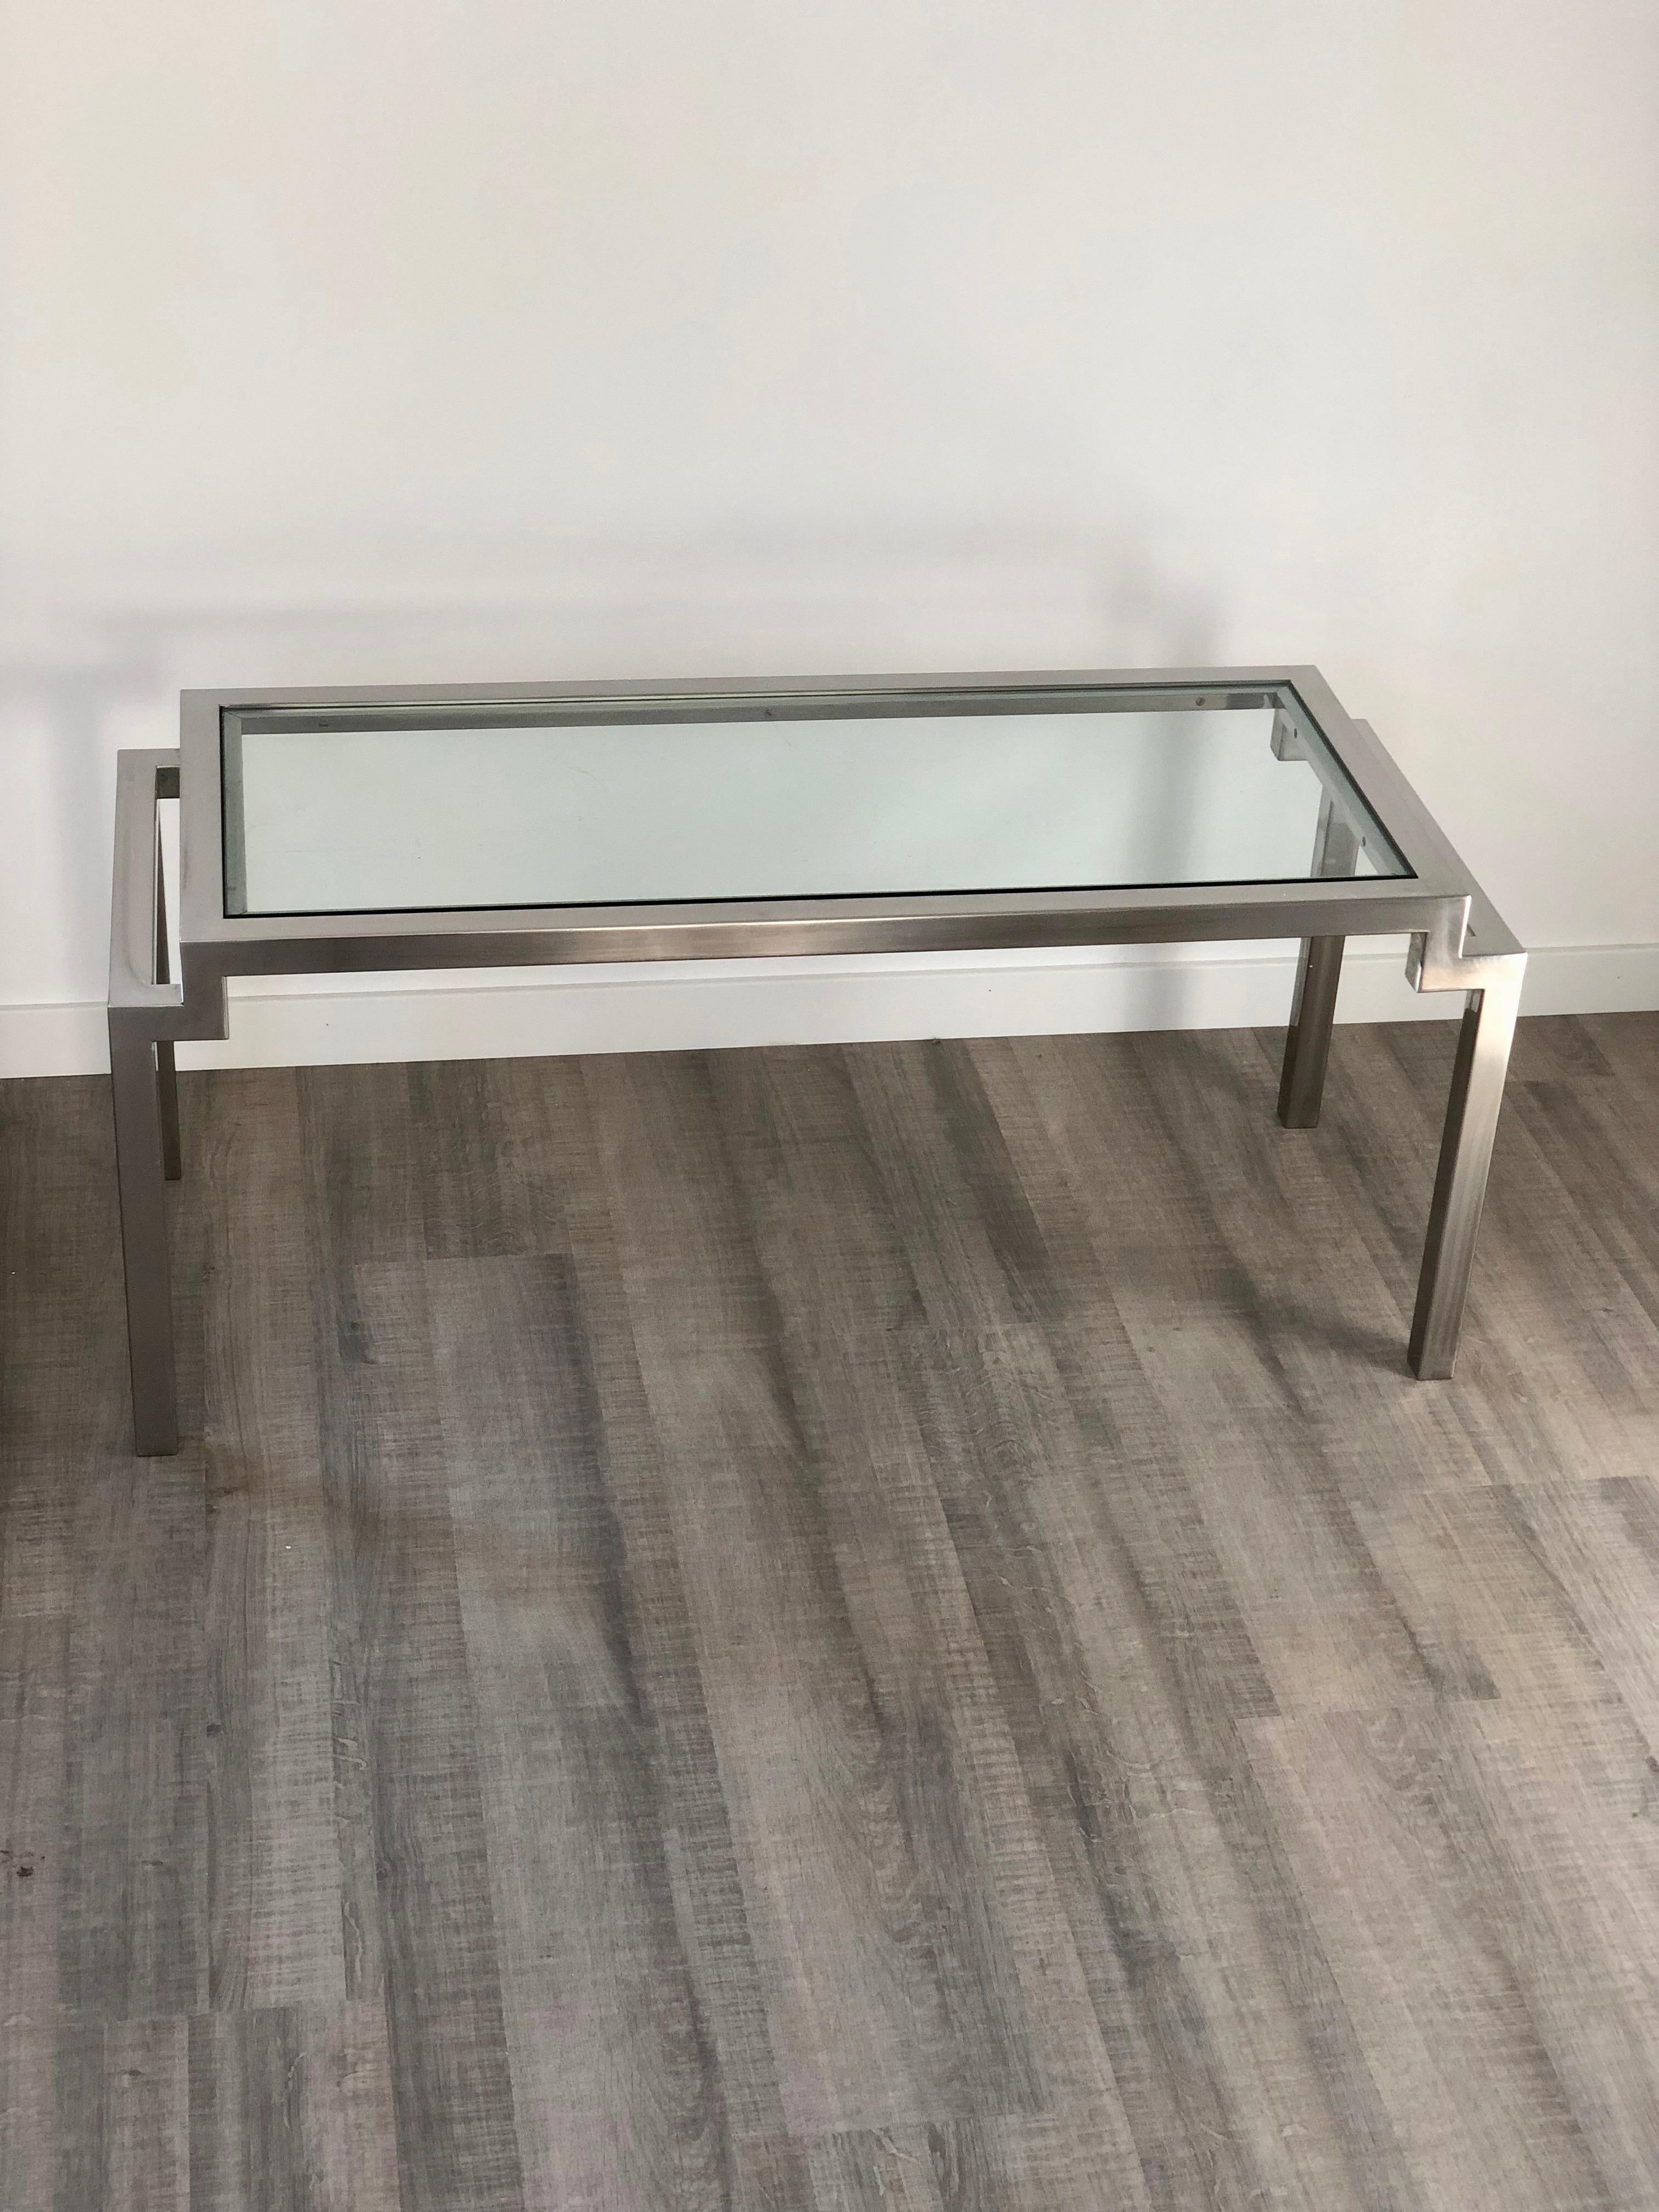 Design coffee table in chrome and glass made in Italy, circa 1970.
In the style of Cy Mann.